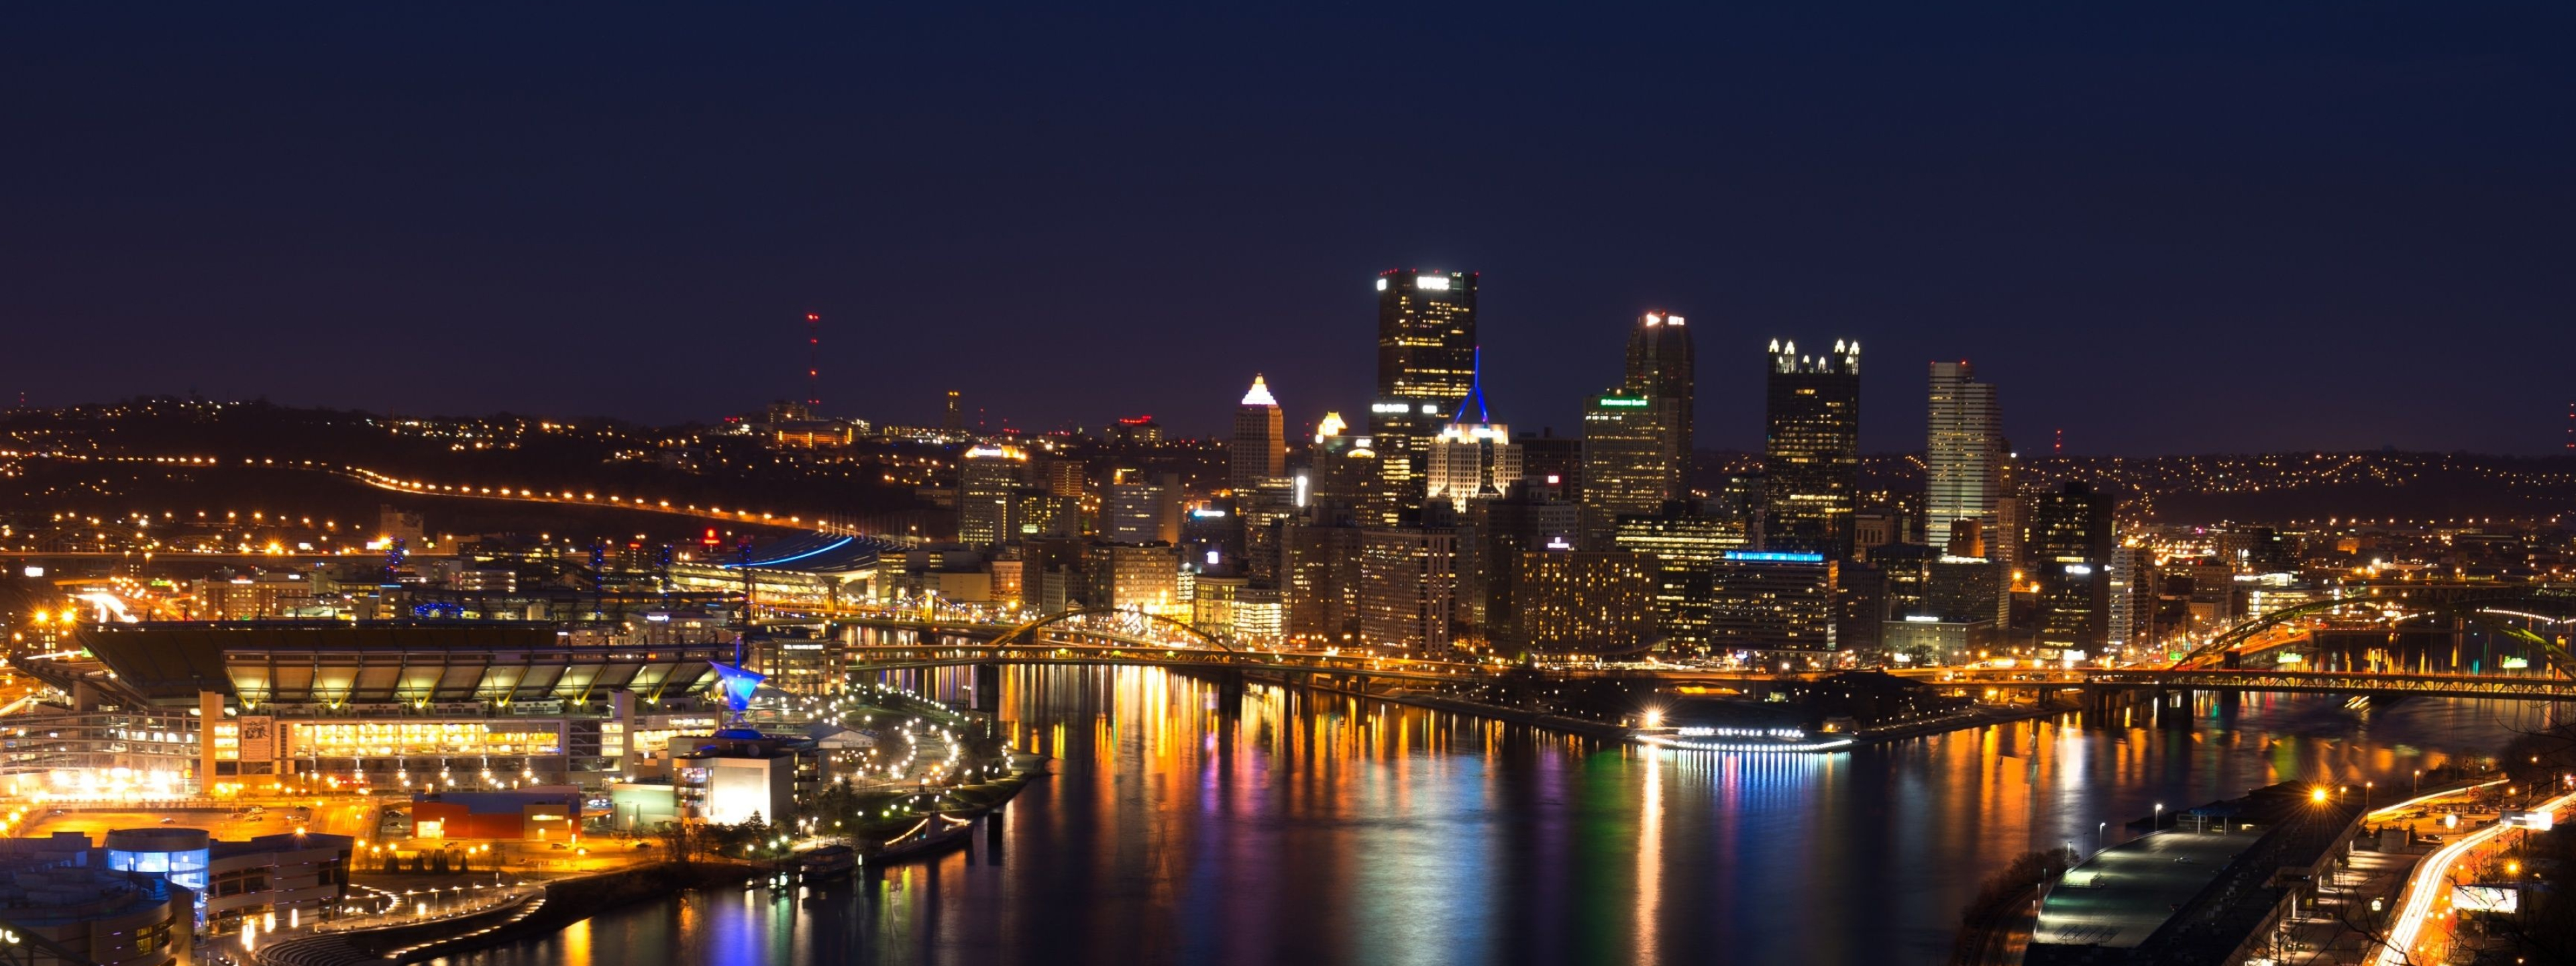 Pittsburgh skyline, Urban landscapes, Cityscapes at dusk, Skyline photography, 3840x1440 Dual Screen Desktop